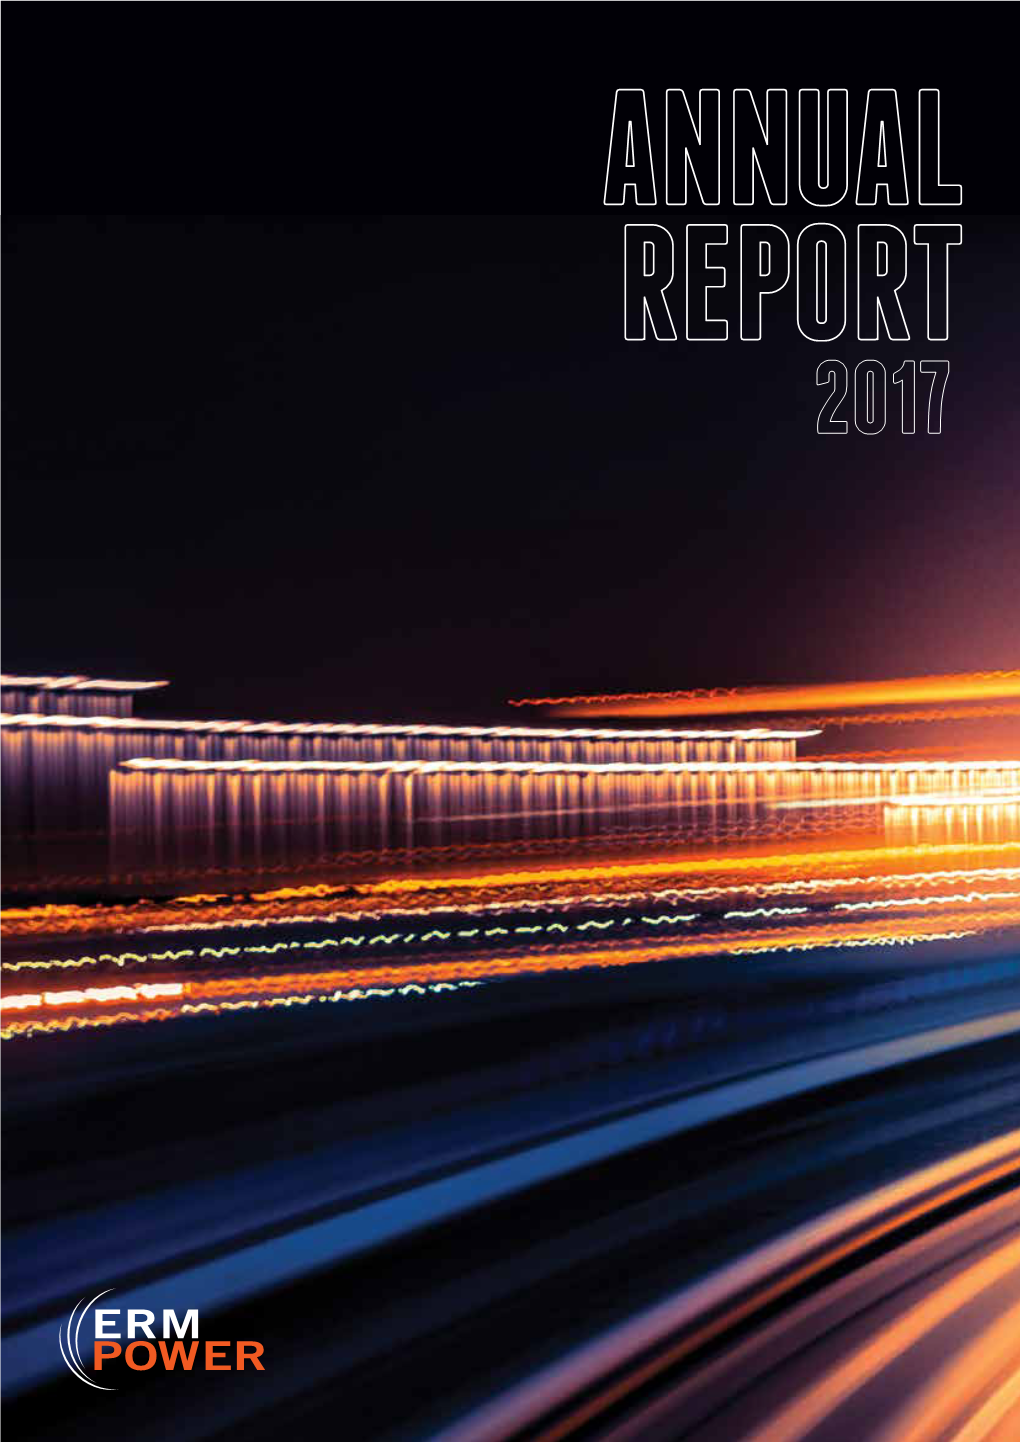 Erm Power Limited Annual Report 2017 Contents